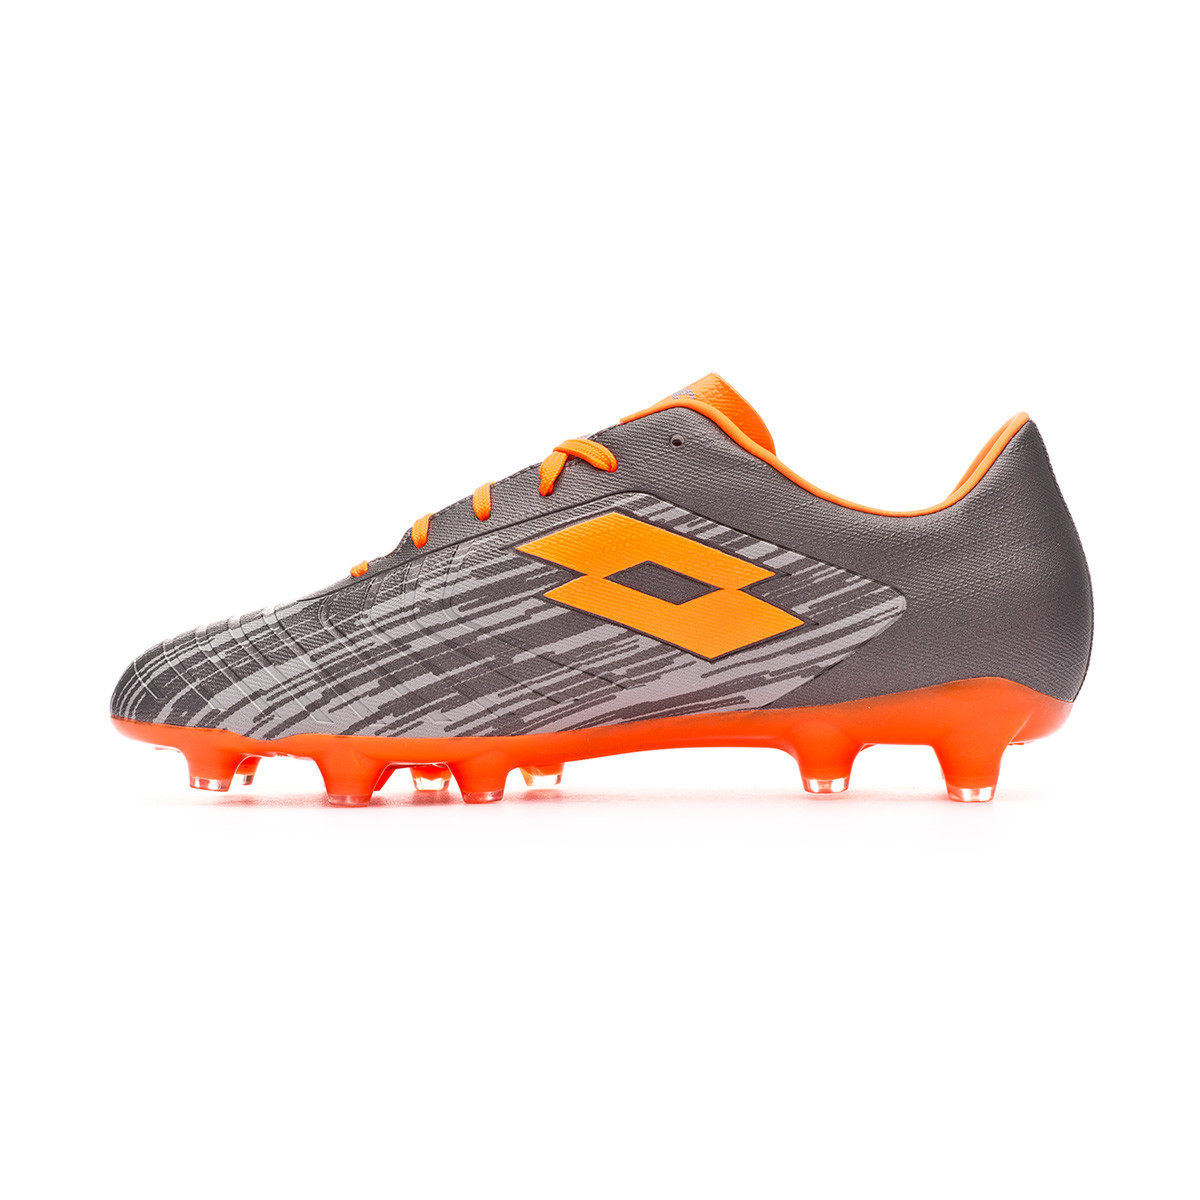 really cool football boots